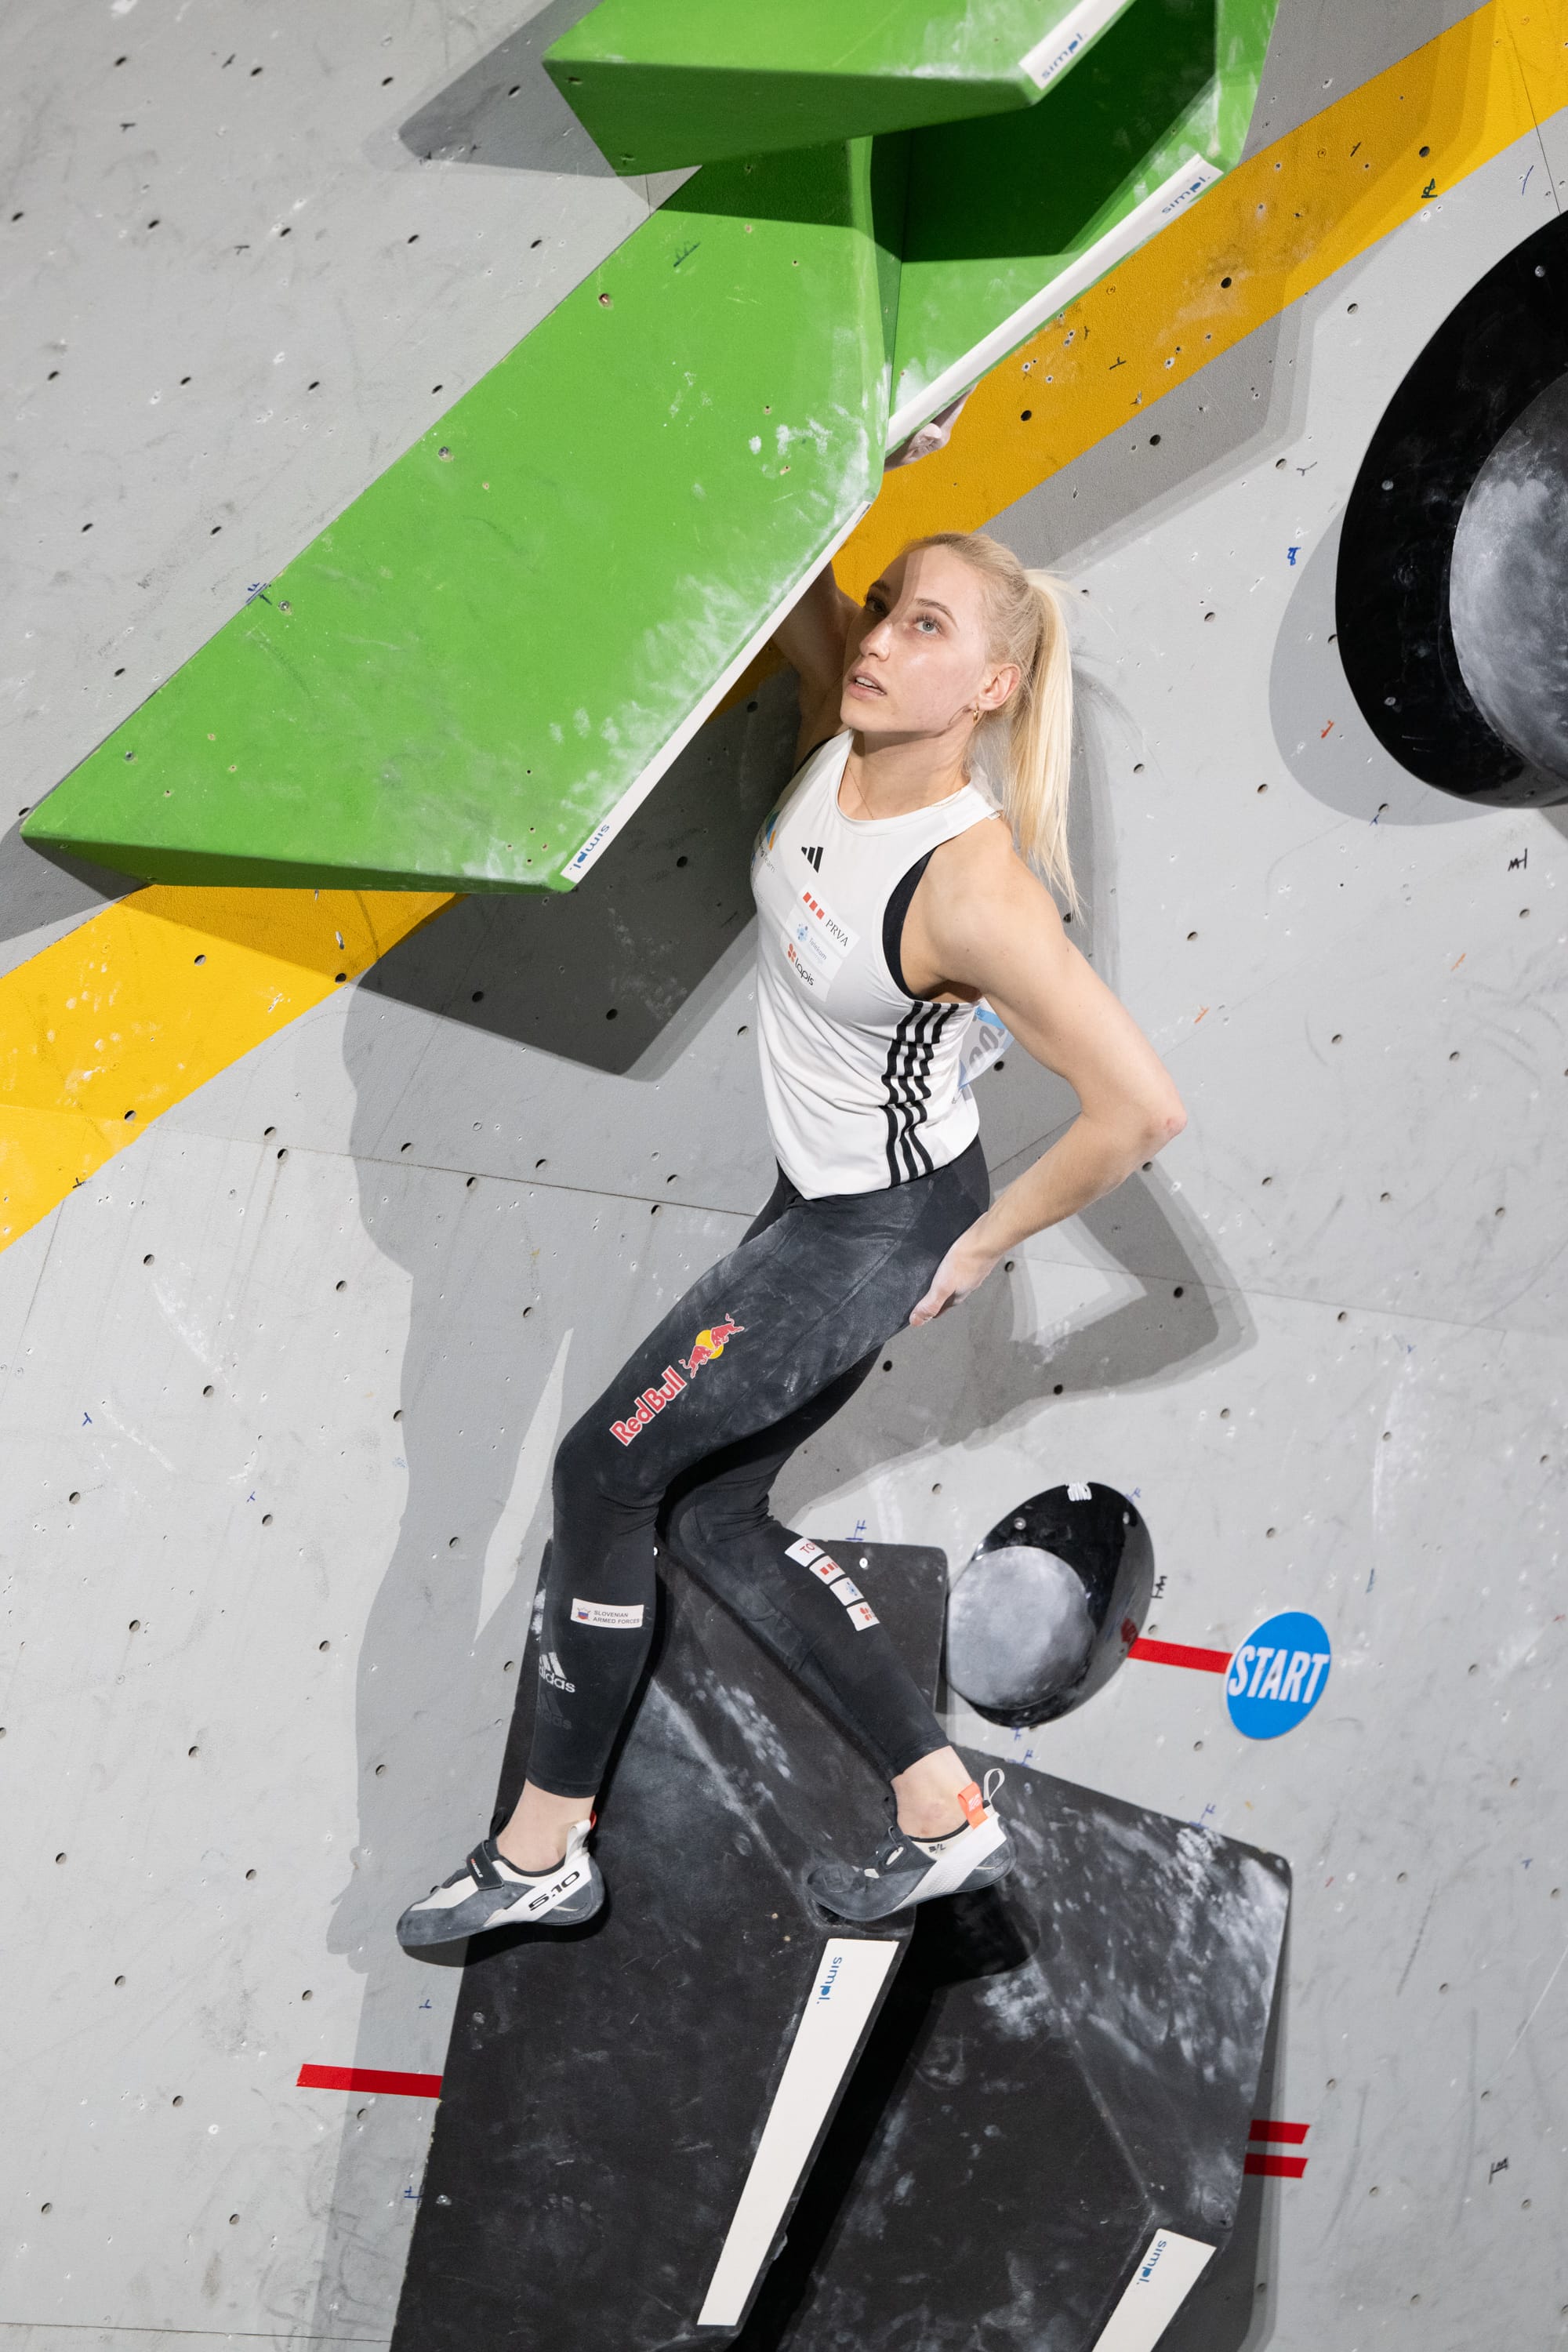 Janja Garnbret paused before going into the green pinches on Boulder 4